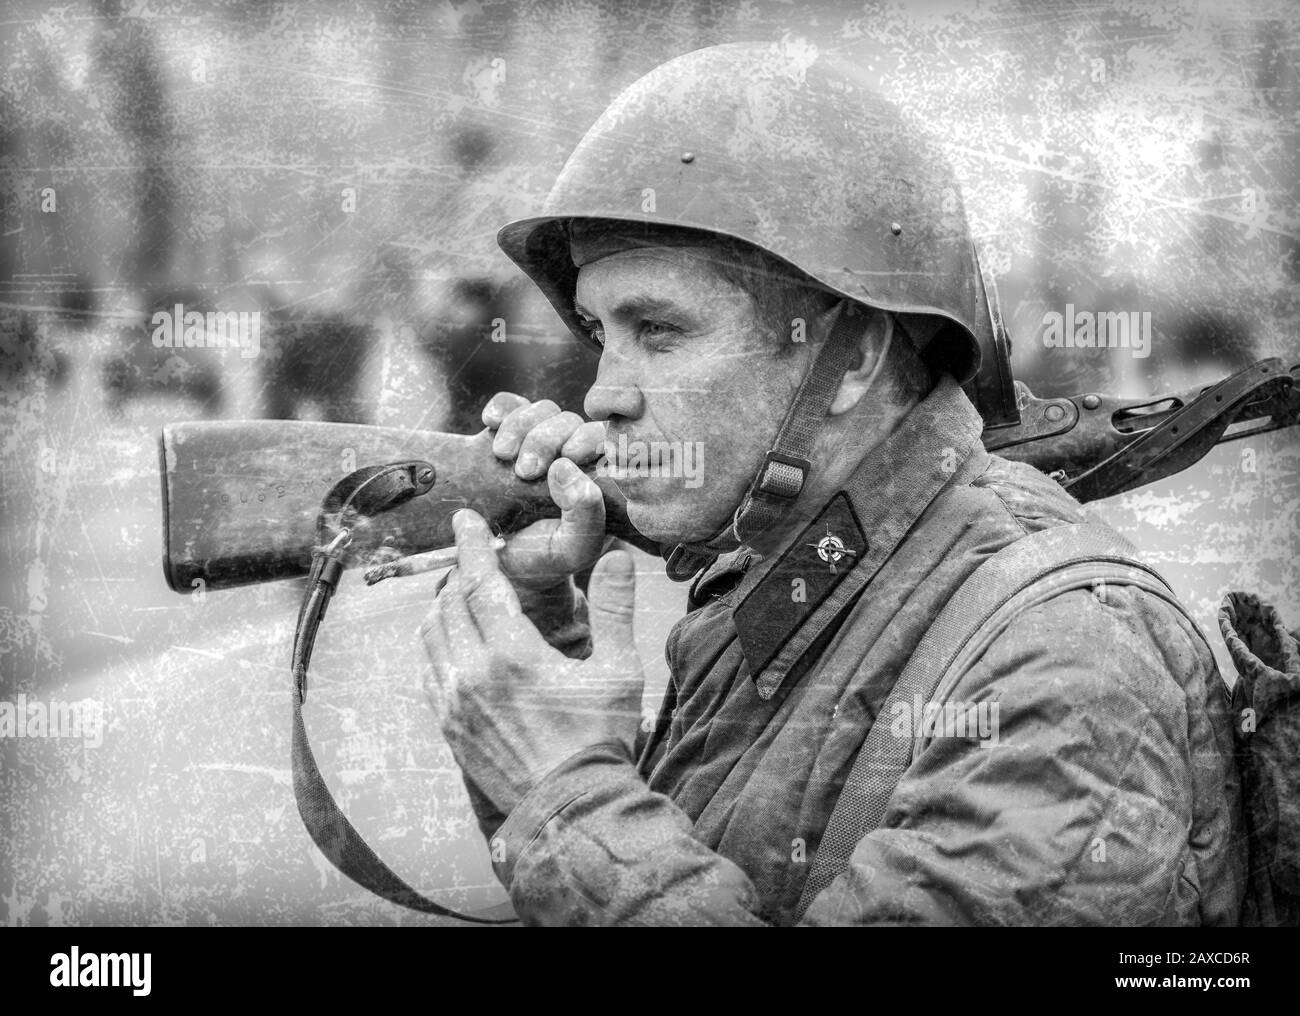 Samara, Russia -  November 7, 2014: Unidentified member of historical reenactment battle in soviet army uniform during the Second World War. Soldier i Stock Photo